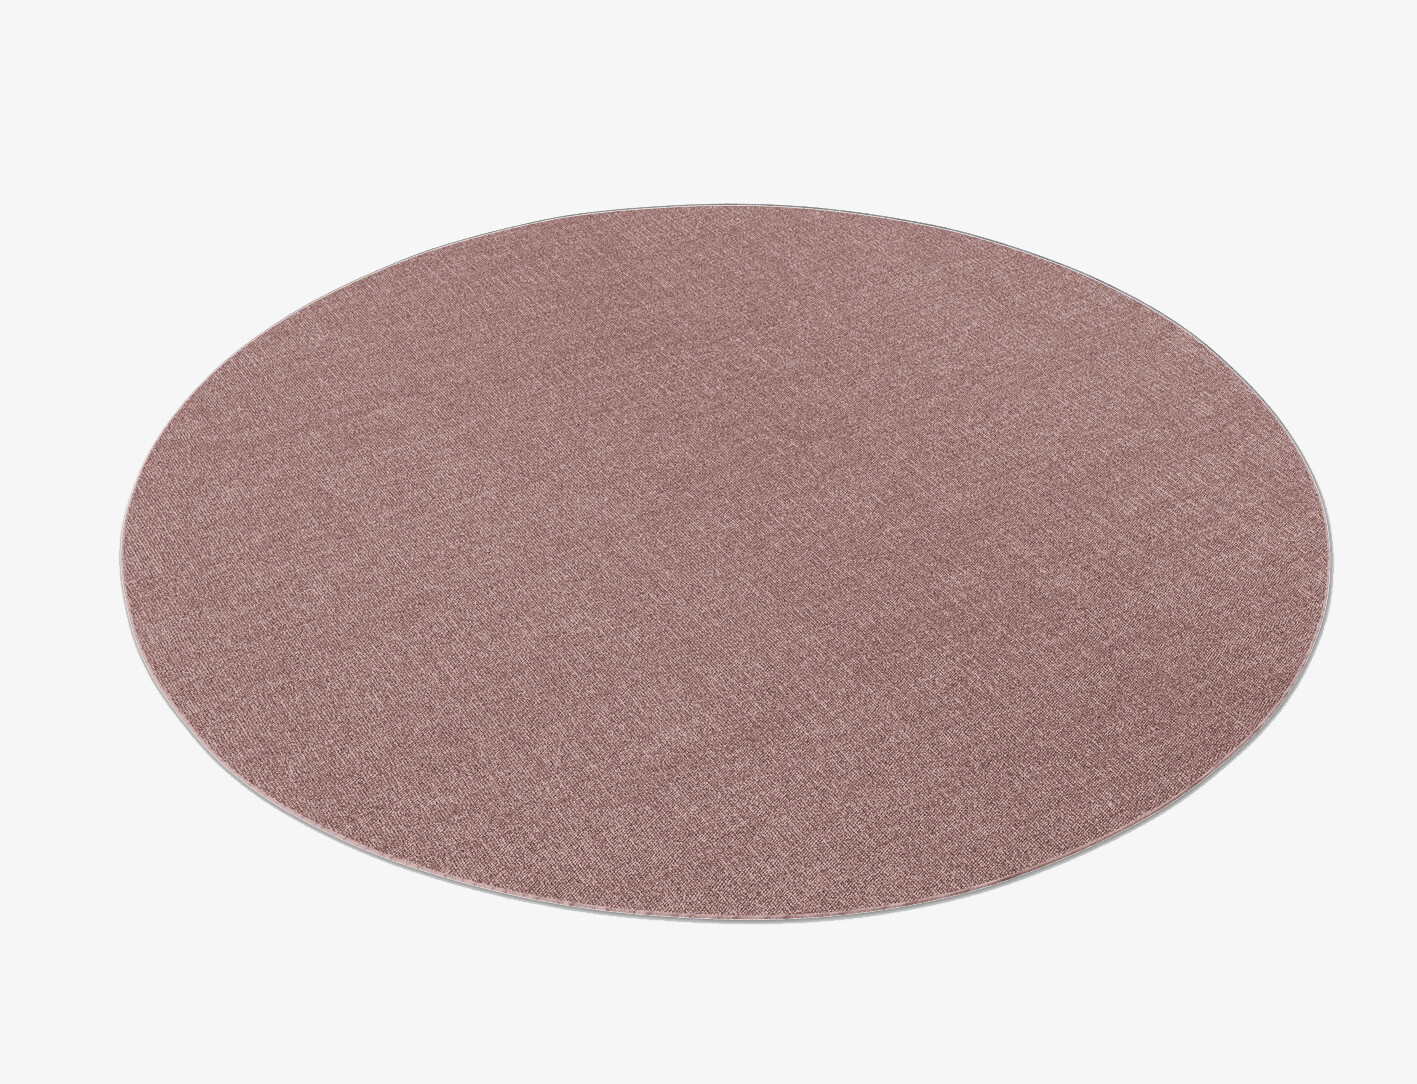 RA-EB09 Solid Colors Round Outdoor Recycled Yarn Custom Rug by Rug Artisan